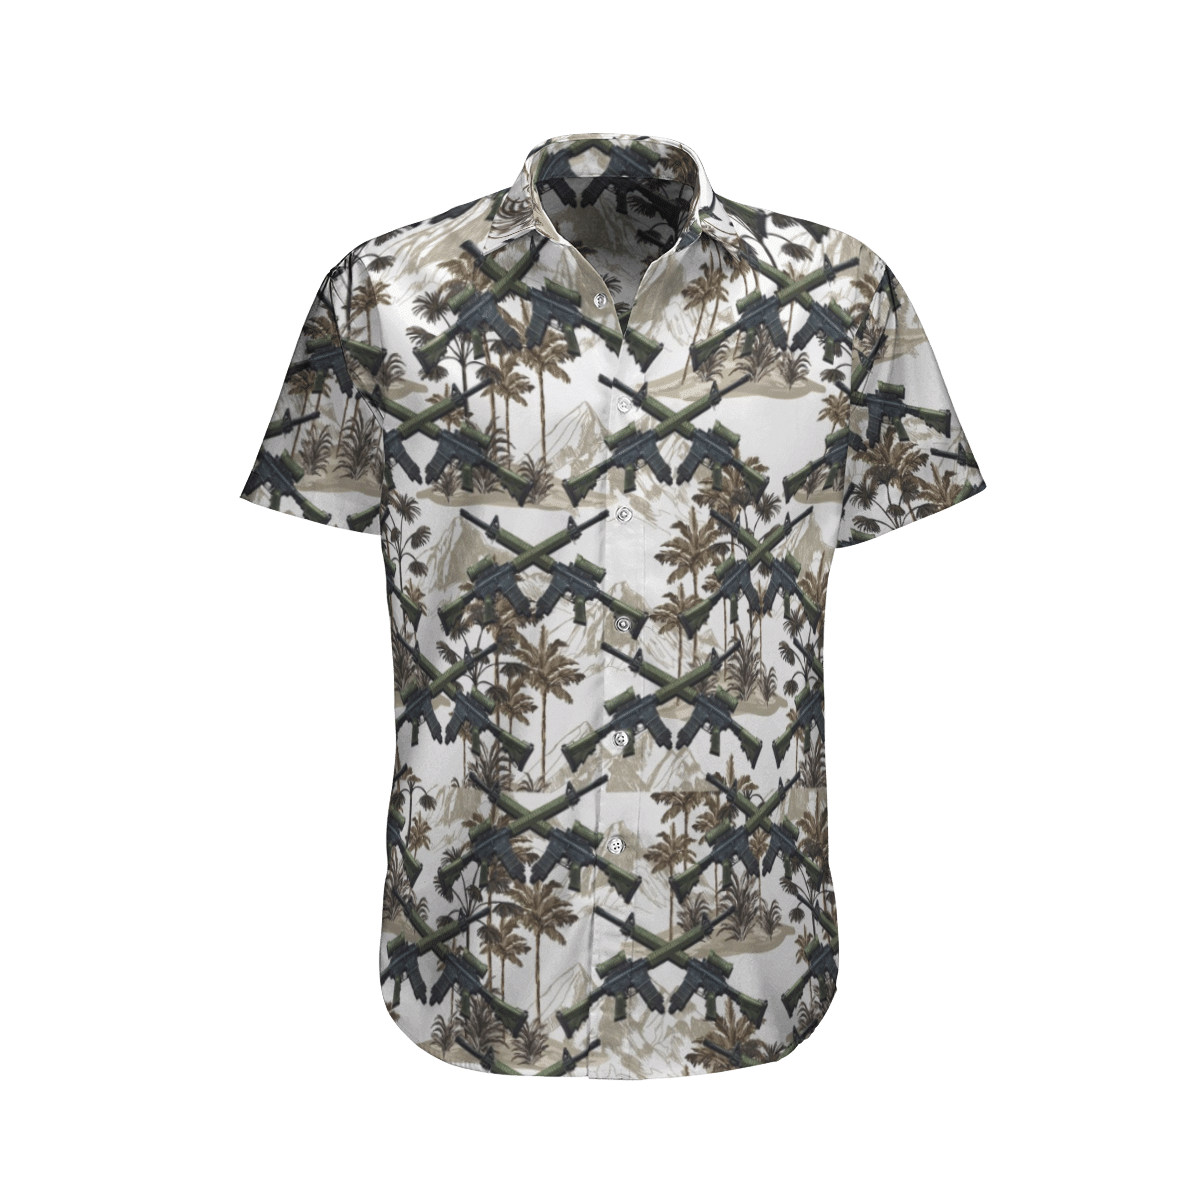 Check out some of the best 3d hawaiian shirt on the market today! 100